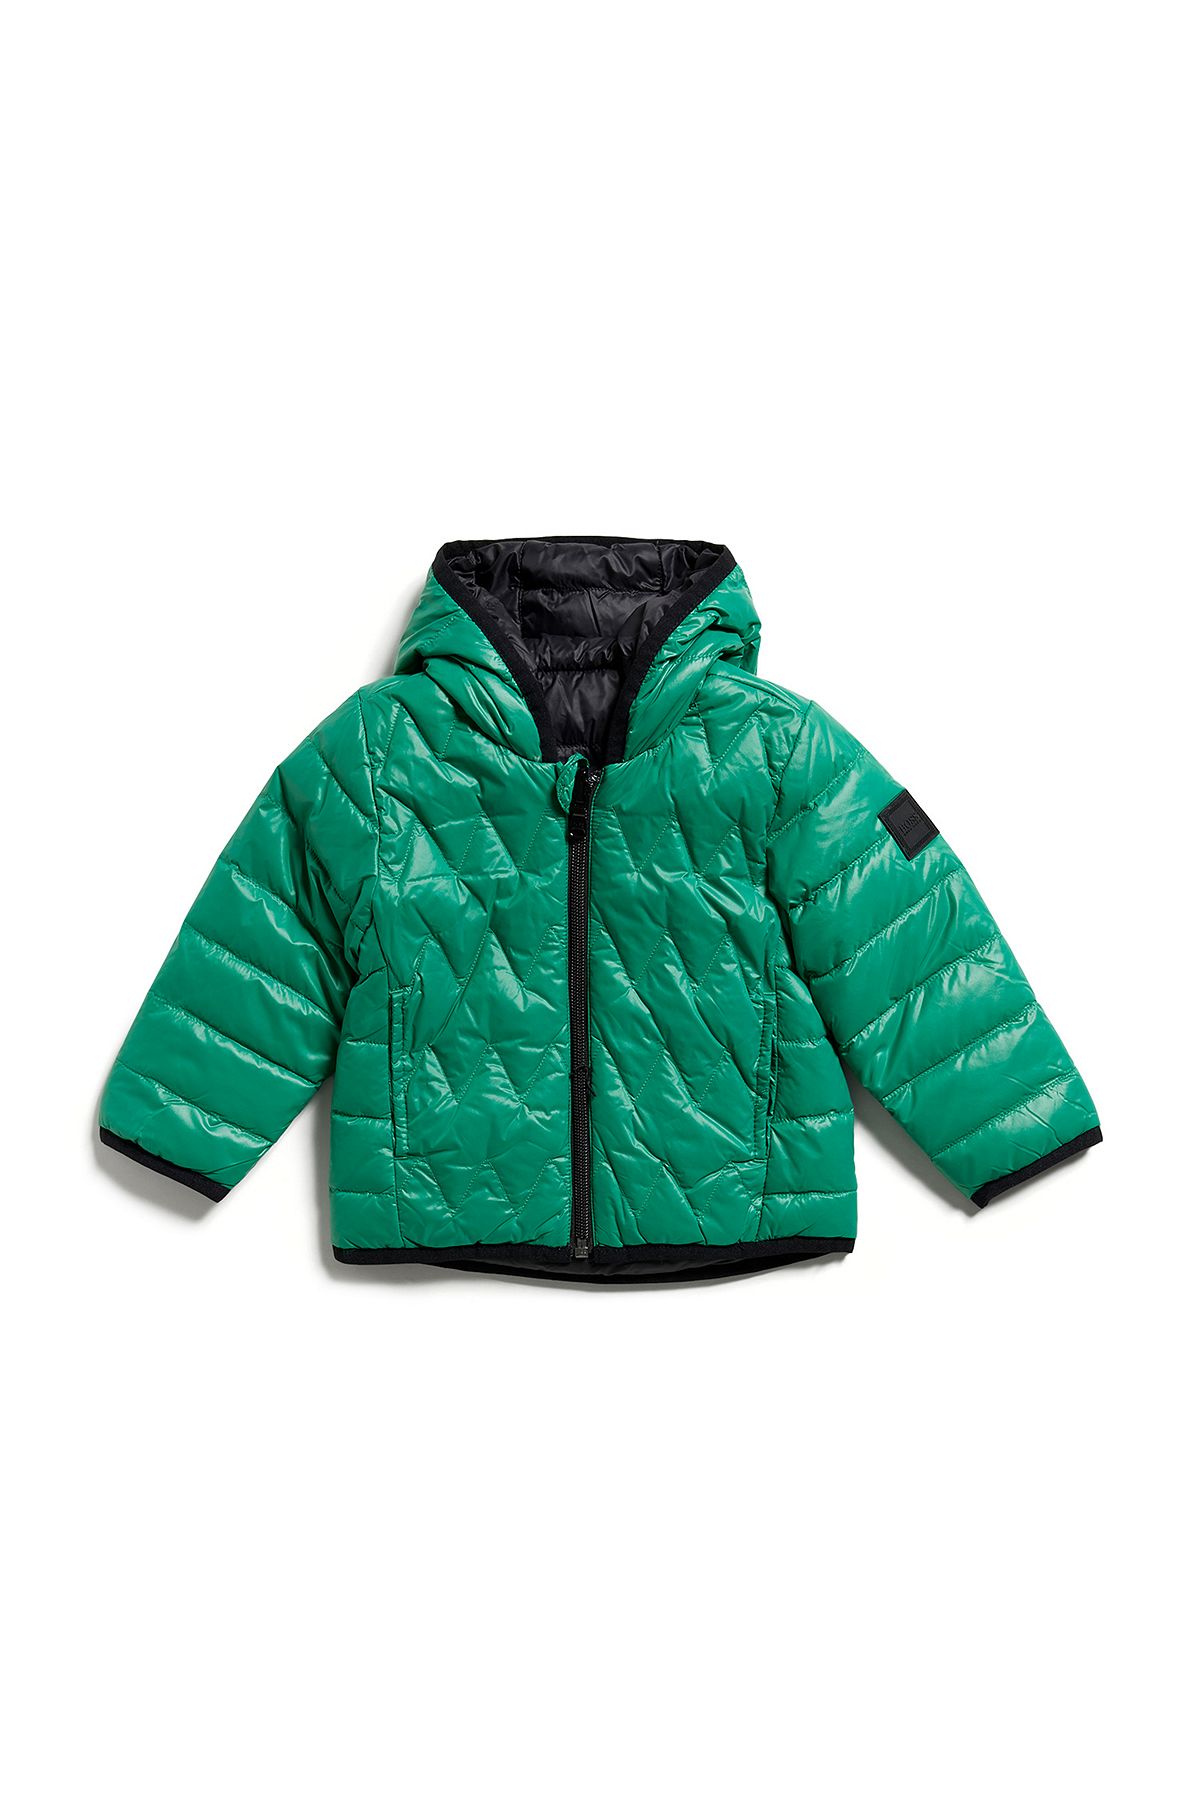 Kids' reversible water-repellent down jacket with logo details, Green